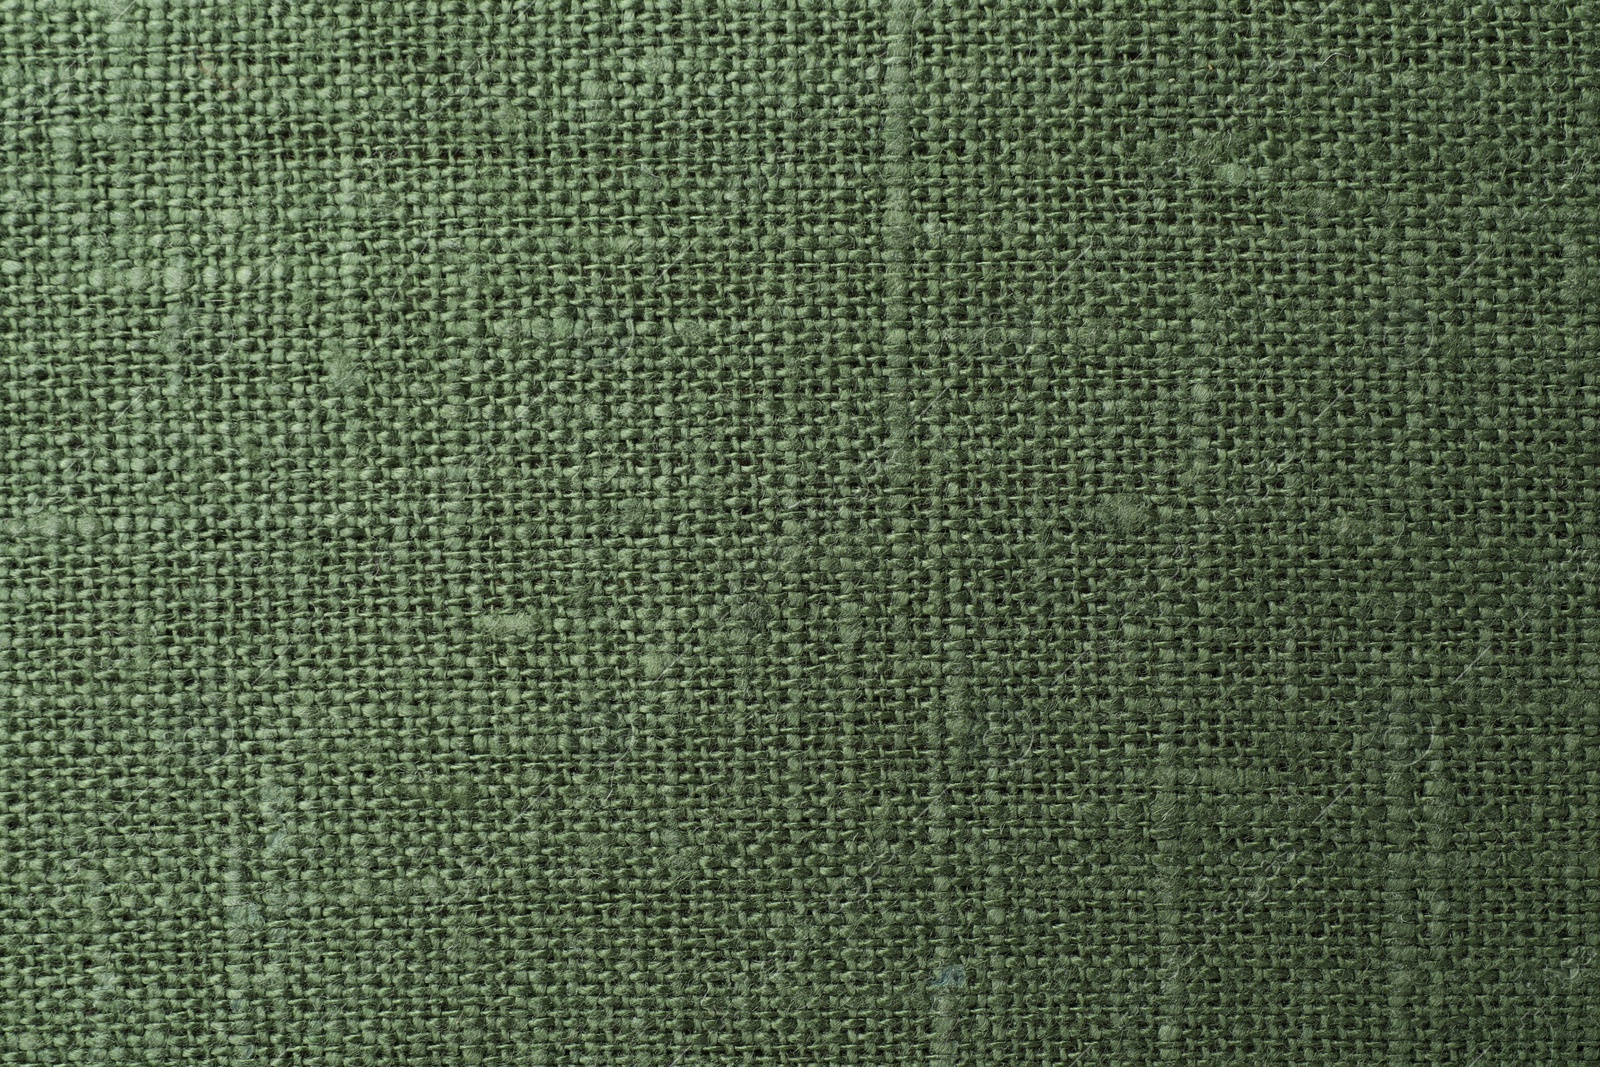 Photo of Texture of green fabric as background, top view